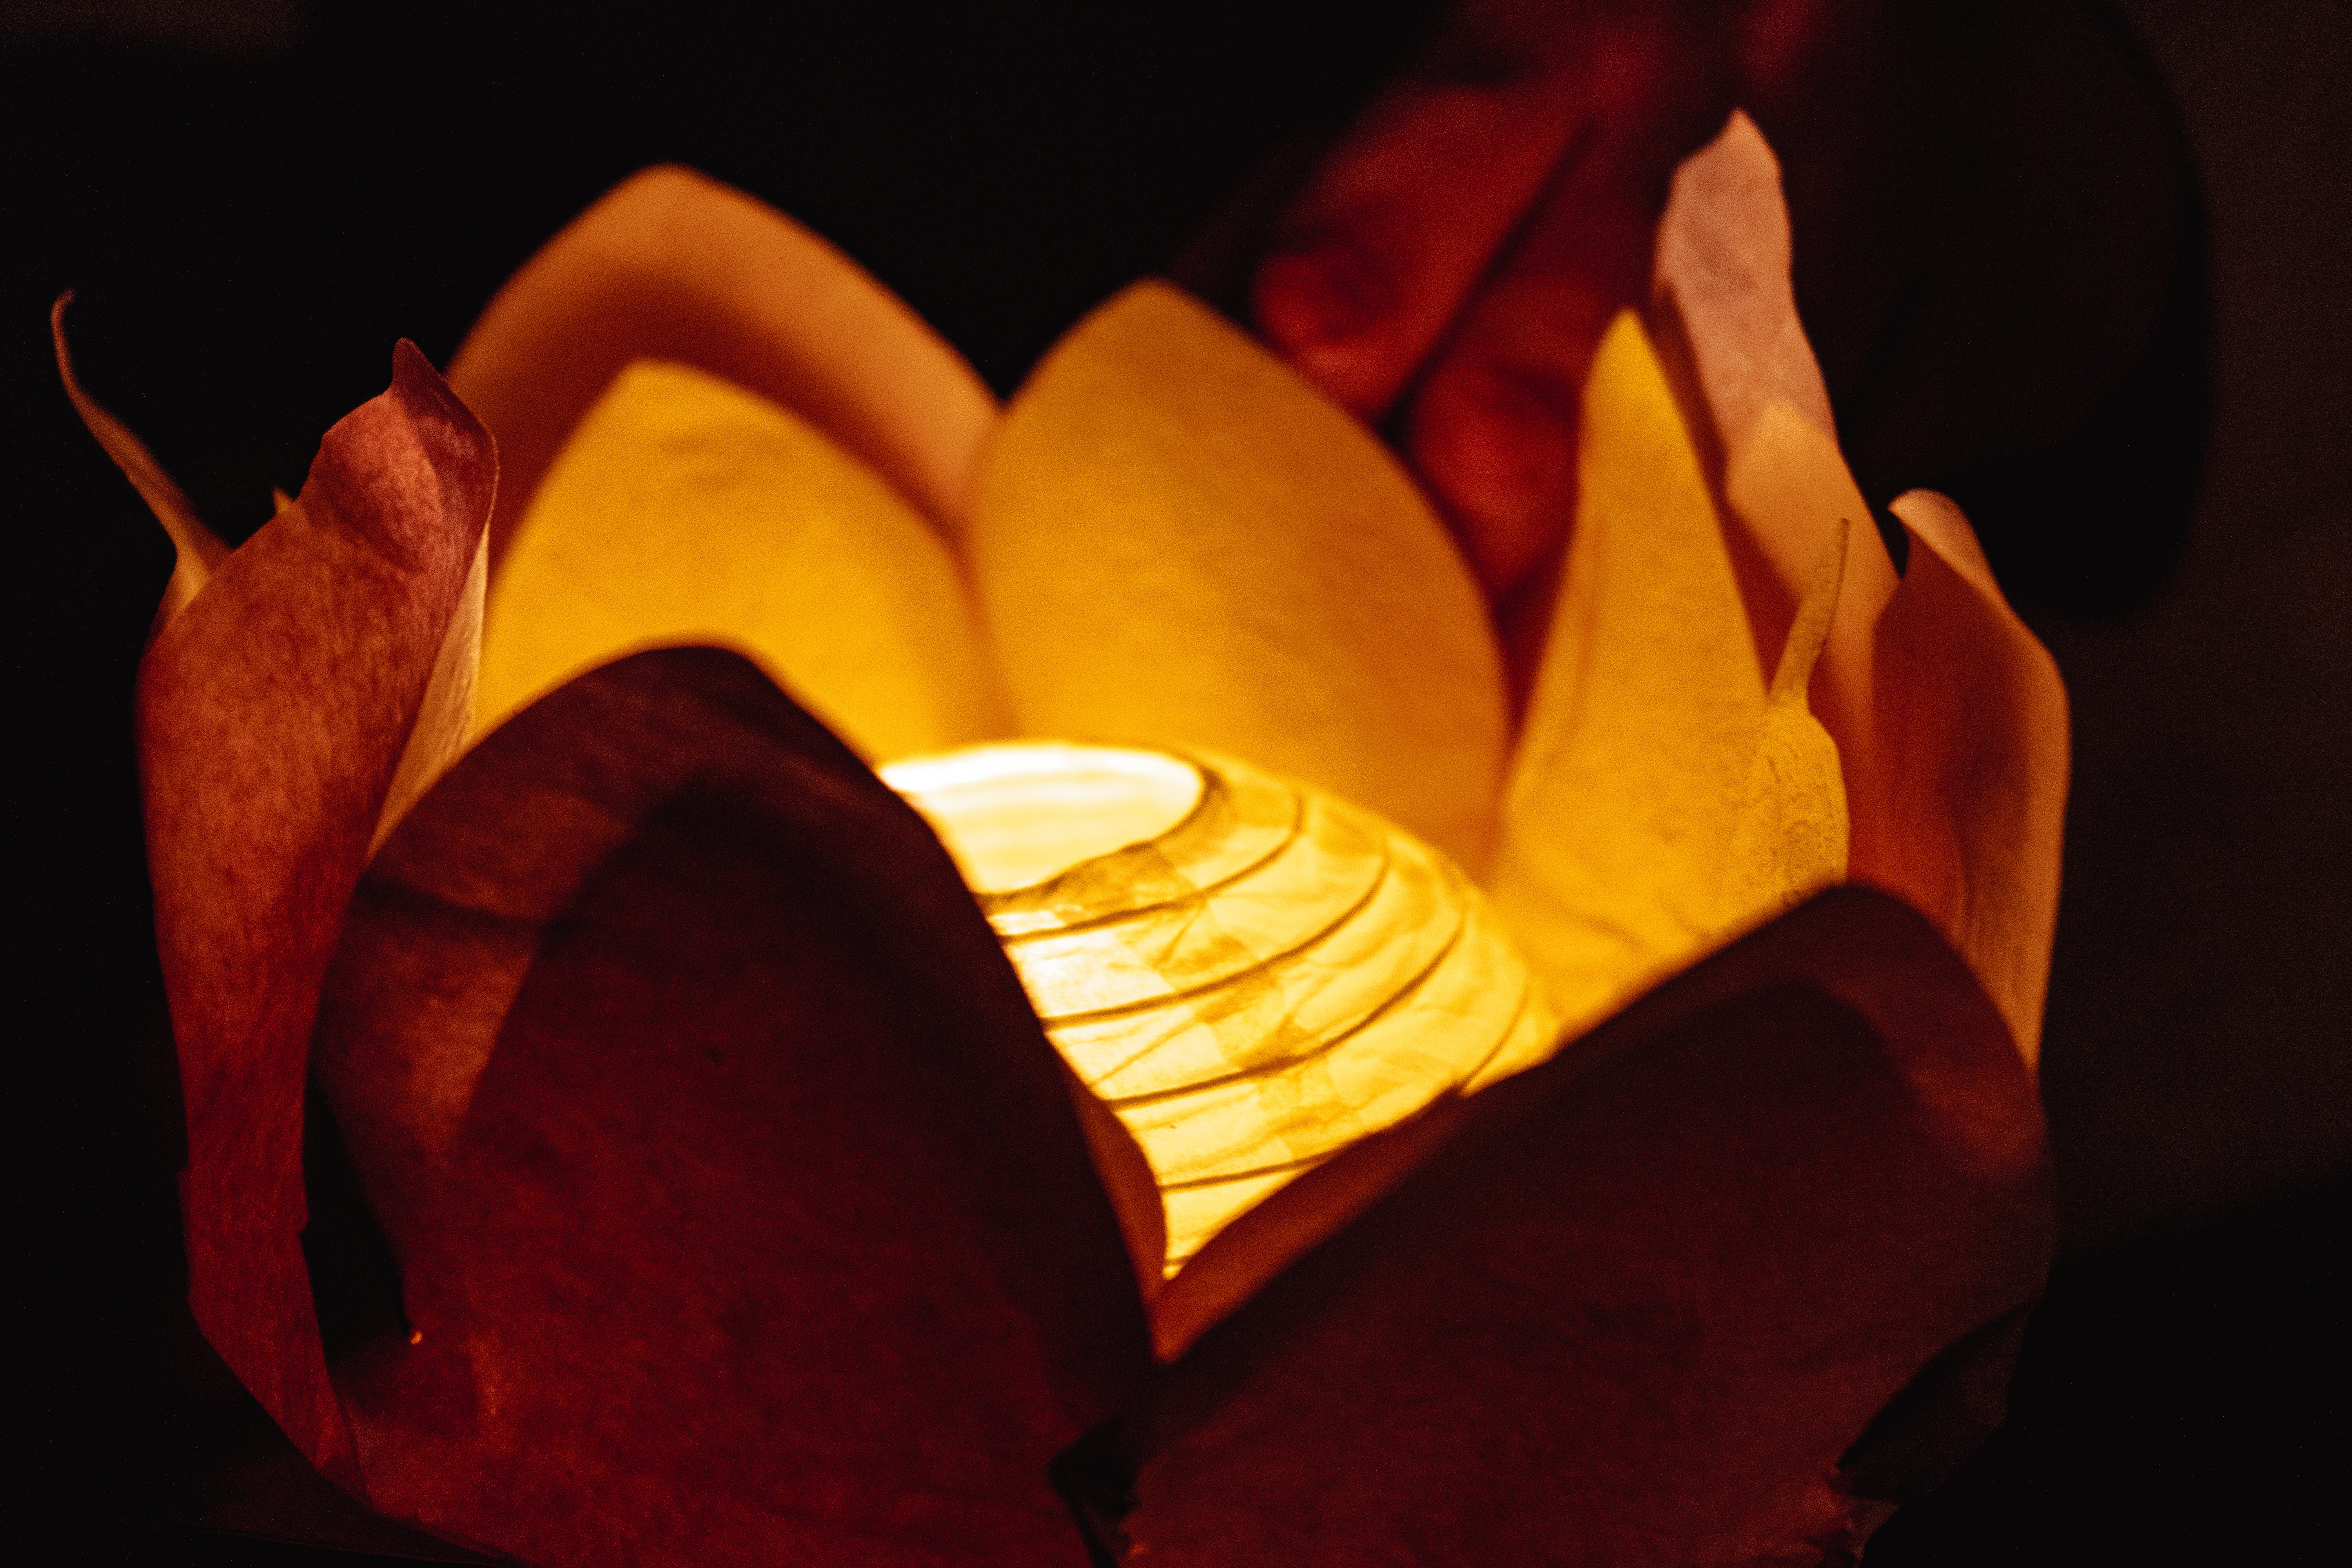 A lit paper lantern inside a paper lotus flower. The light from the lantern is a warm yellow.